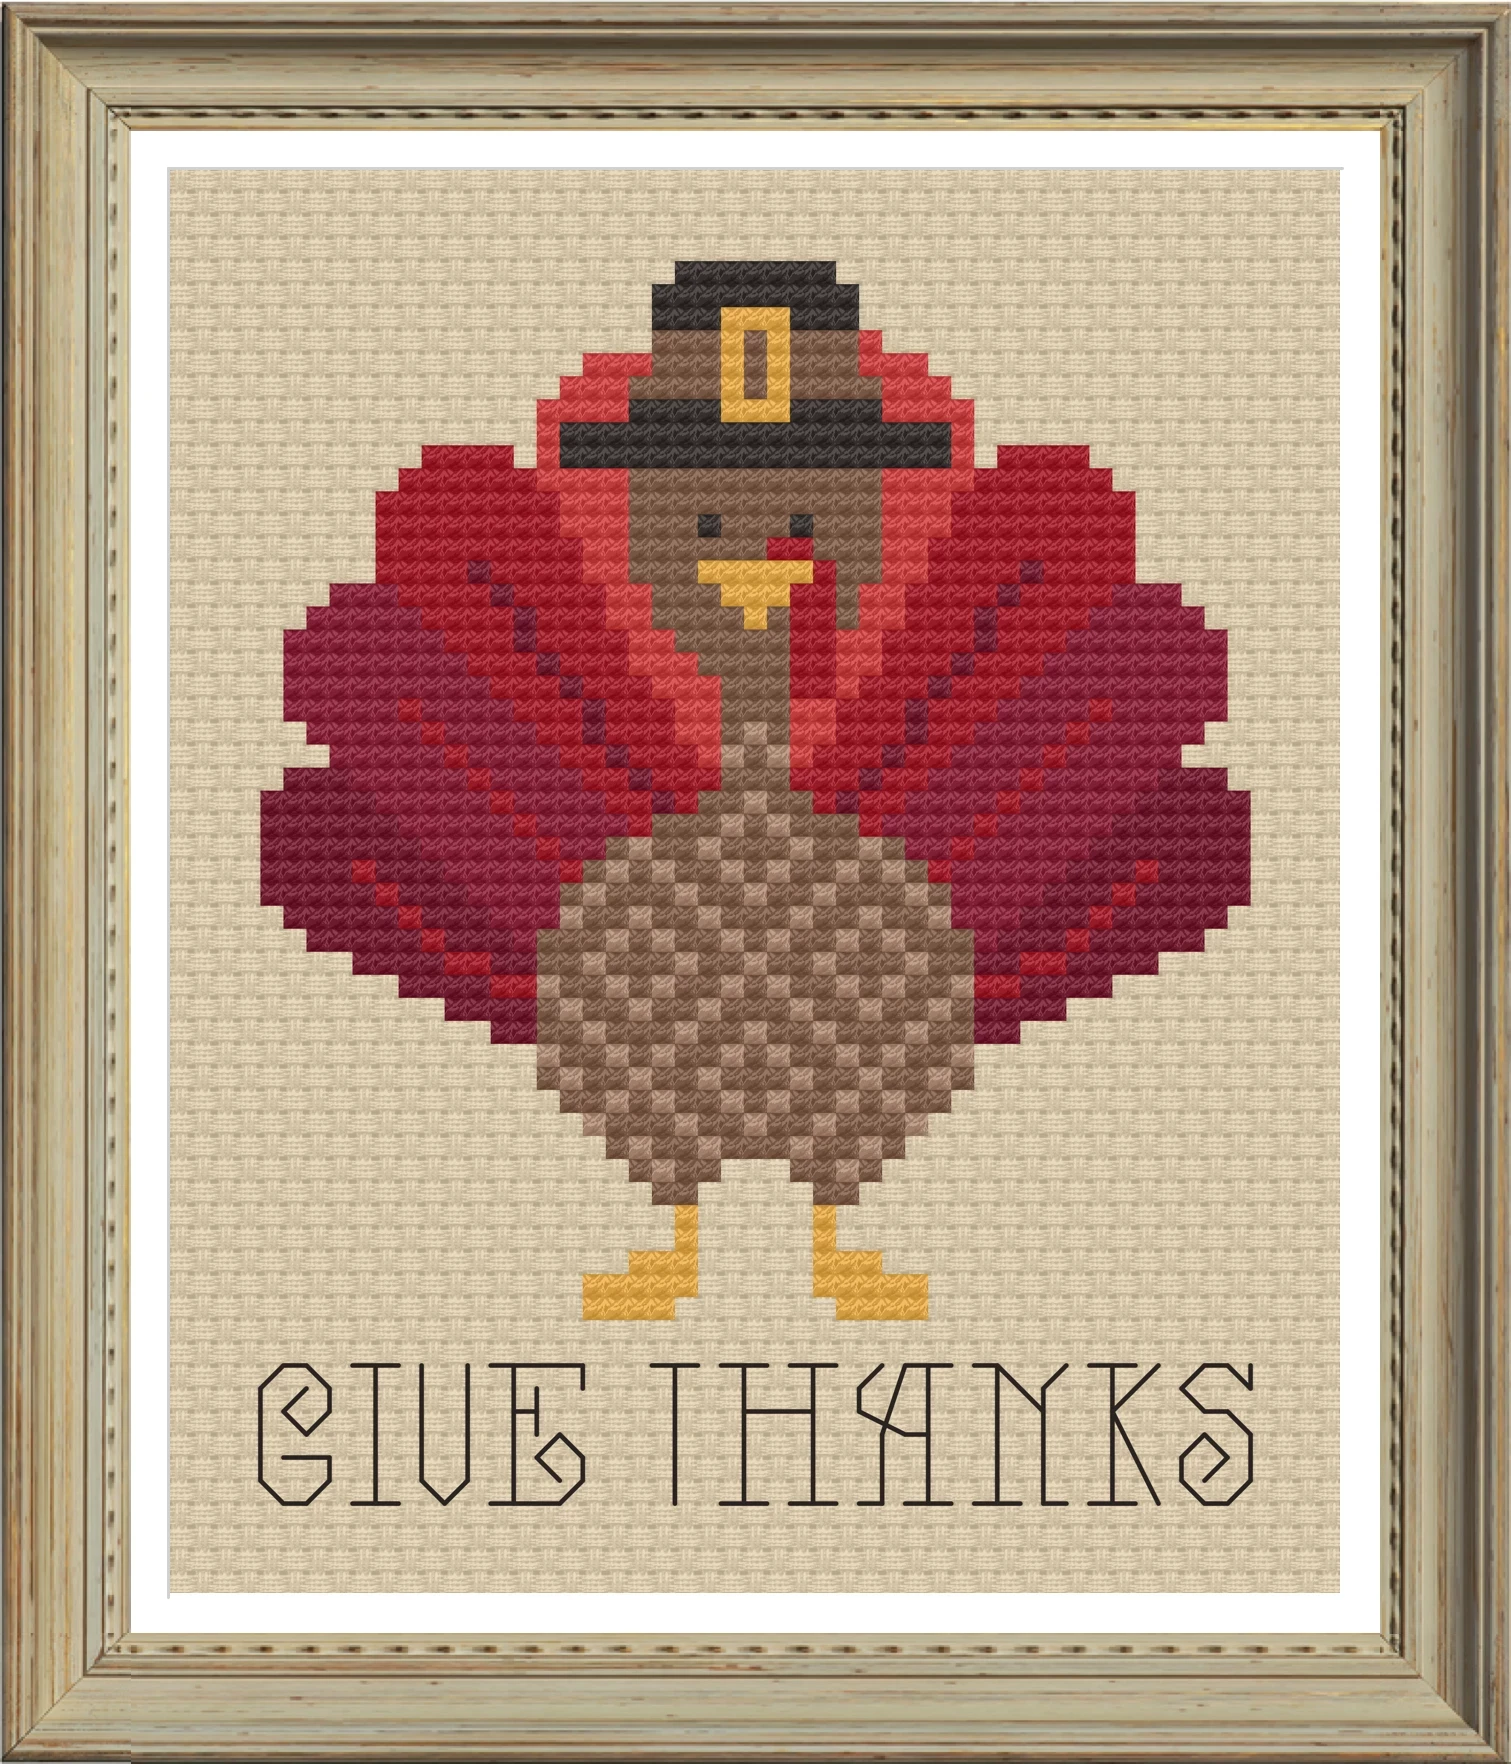  Image of Give Thanks by TinyModernist